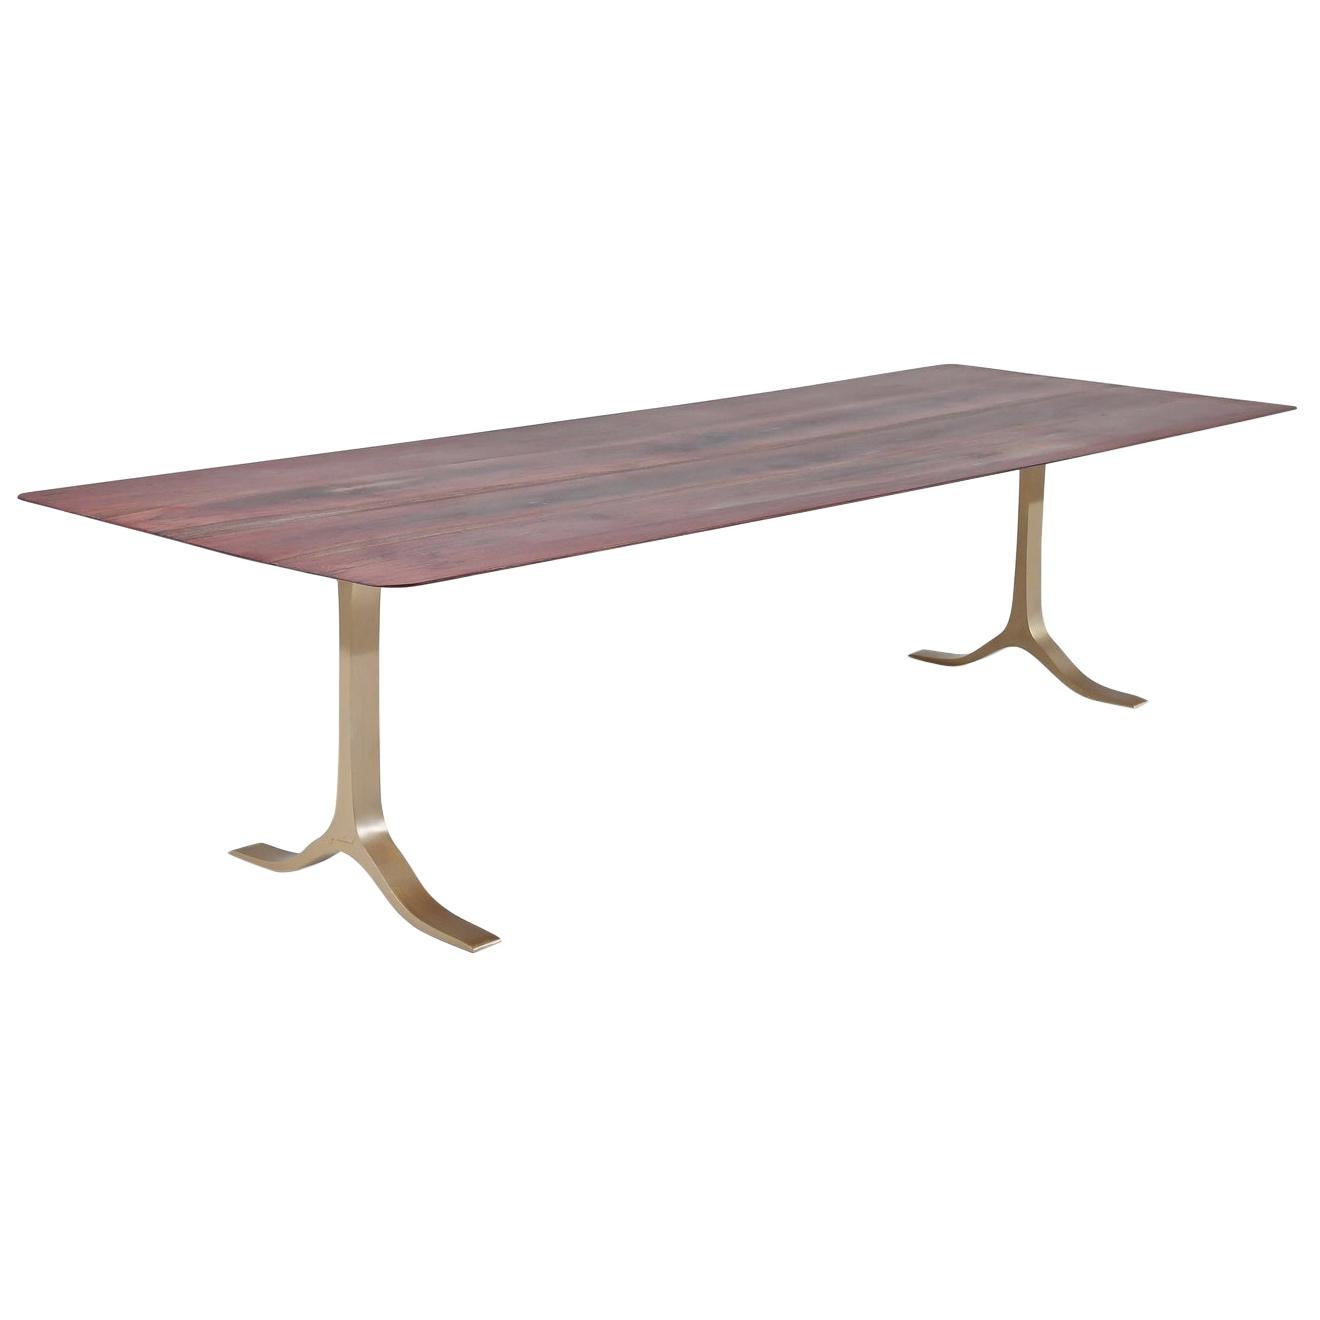 Bespoke Dining Table, Reclaimed Wood, Sand Cast Brass Base, by P. Tendercool For Sale